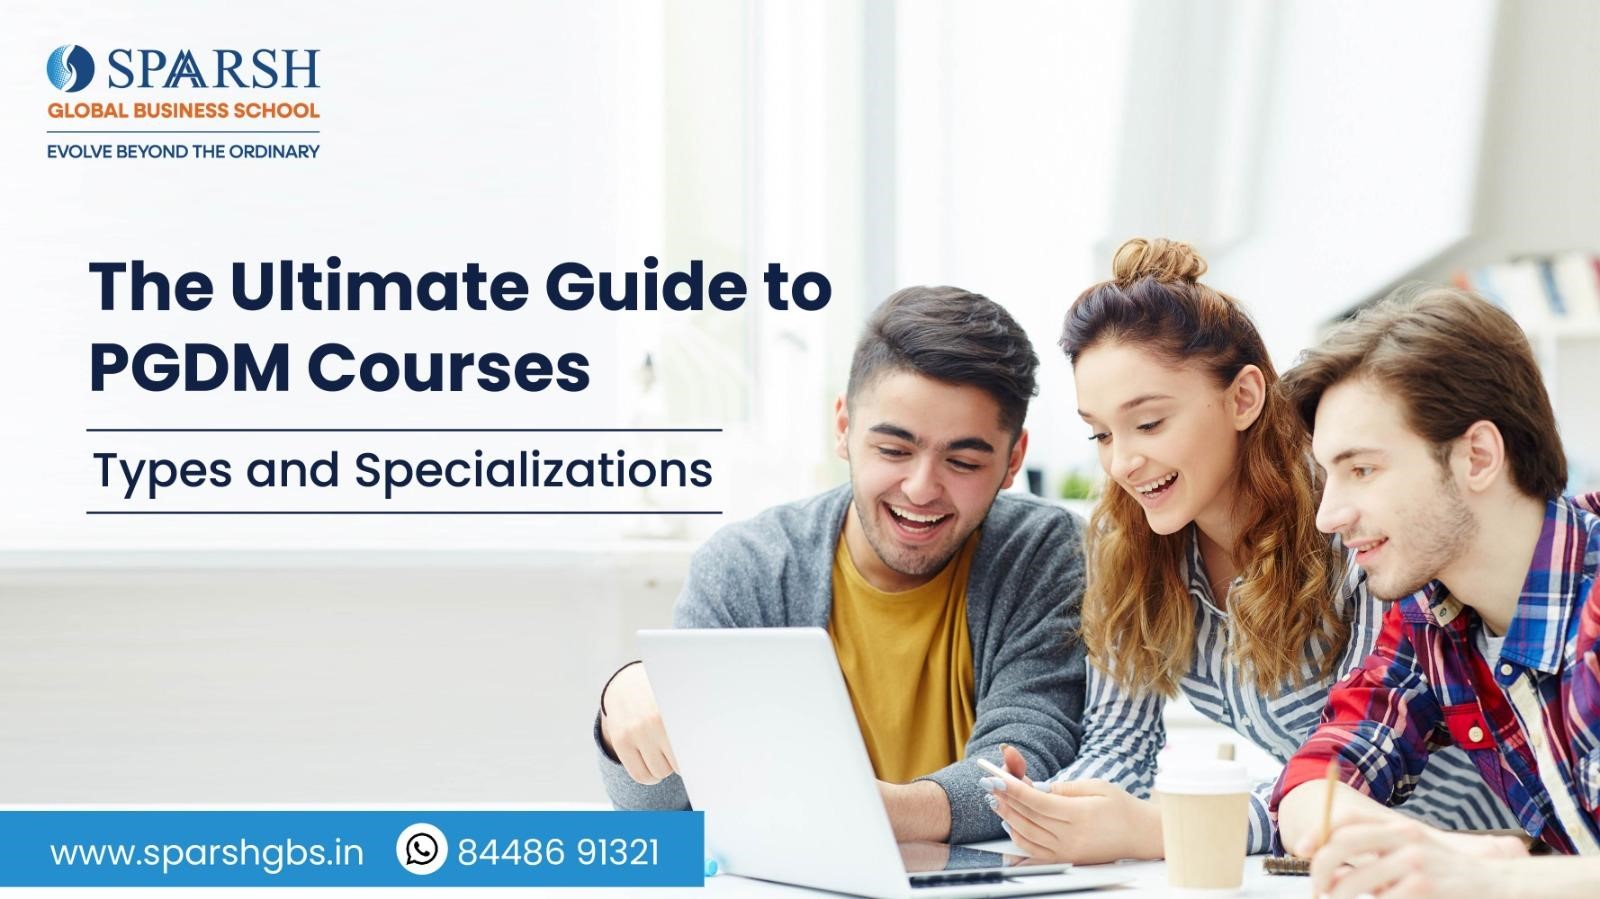 PGDM course types and specialization